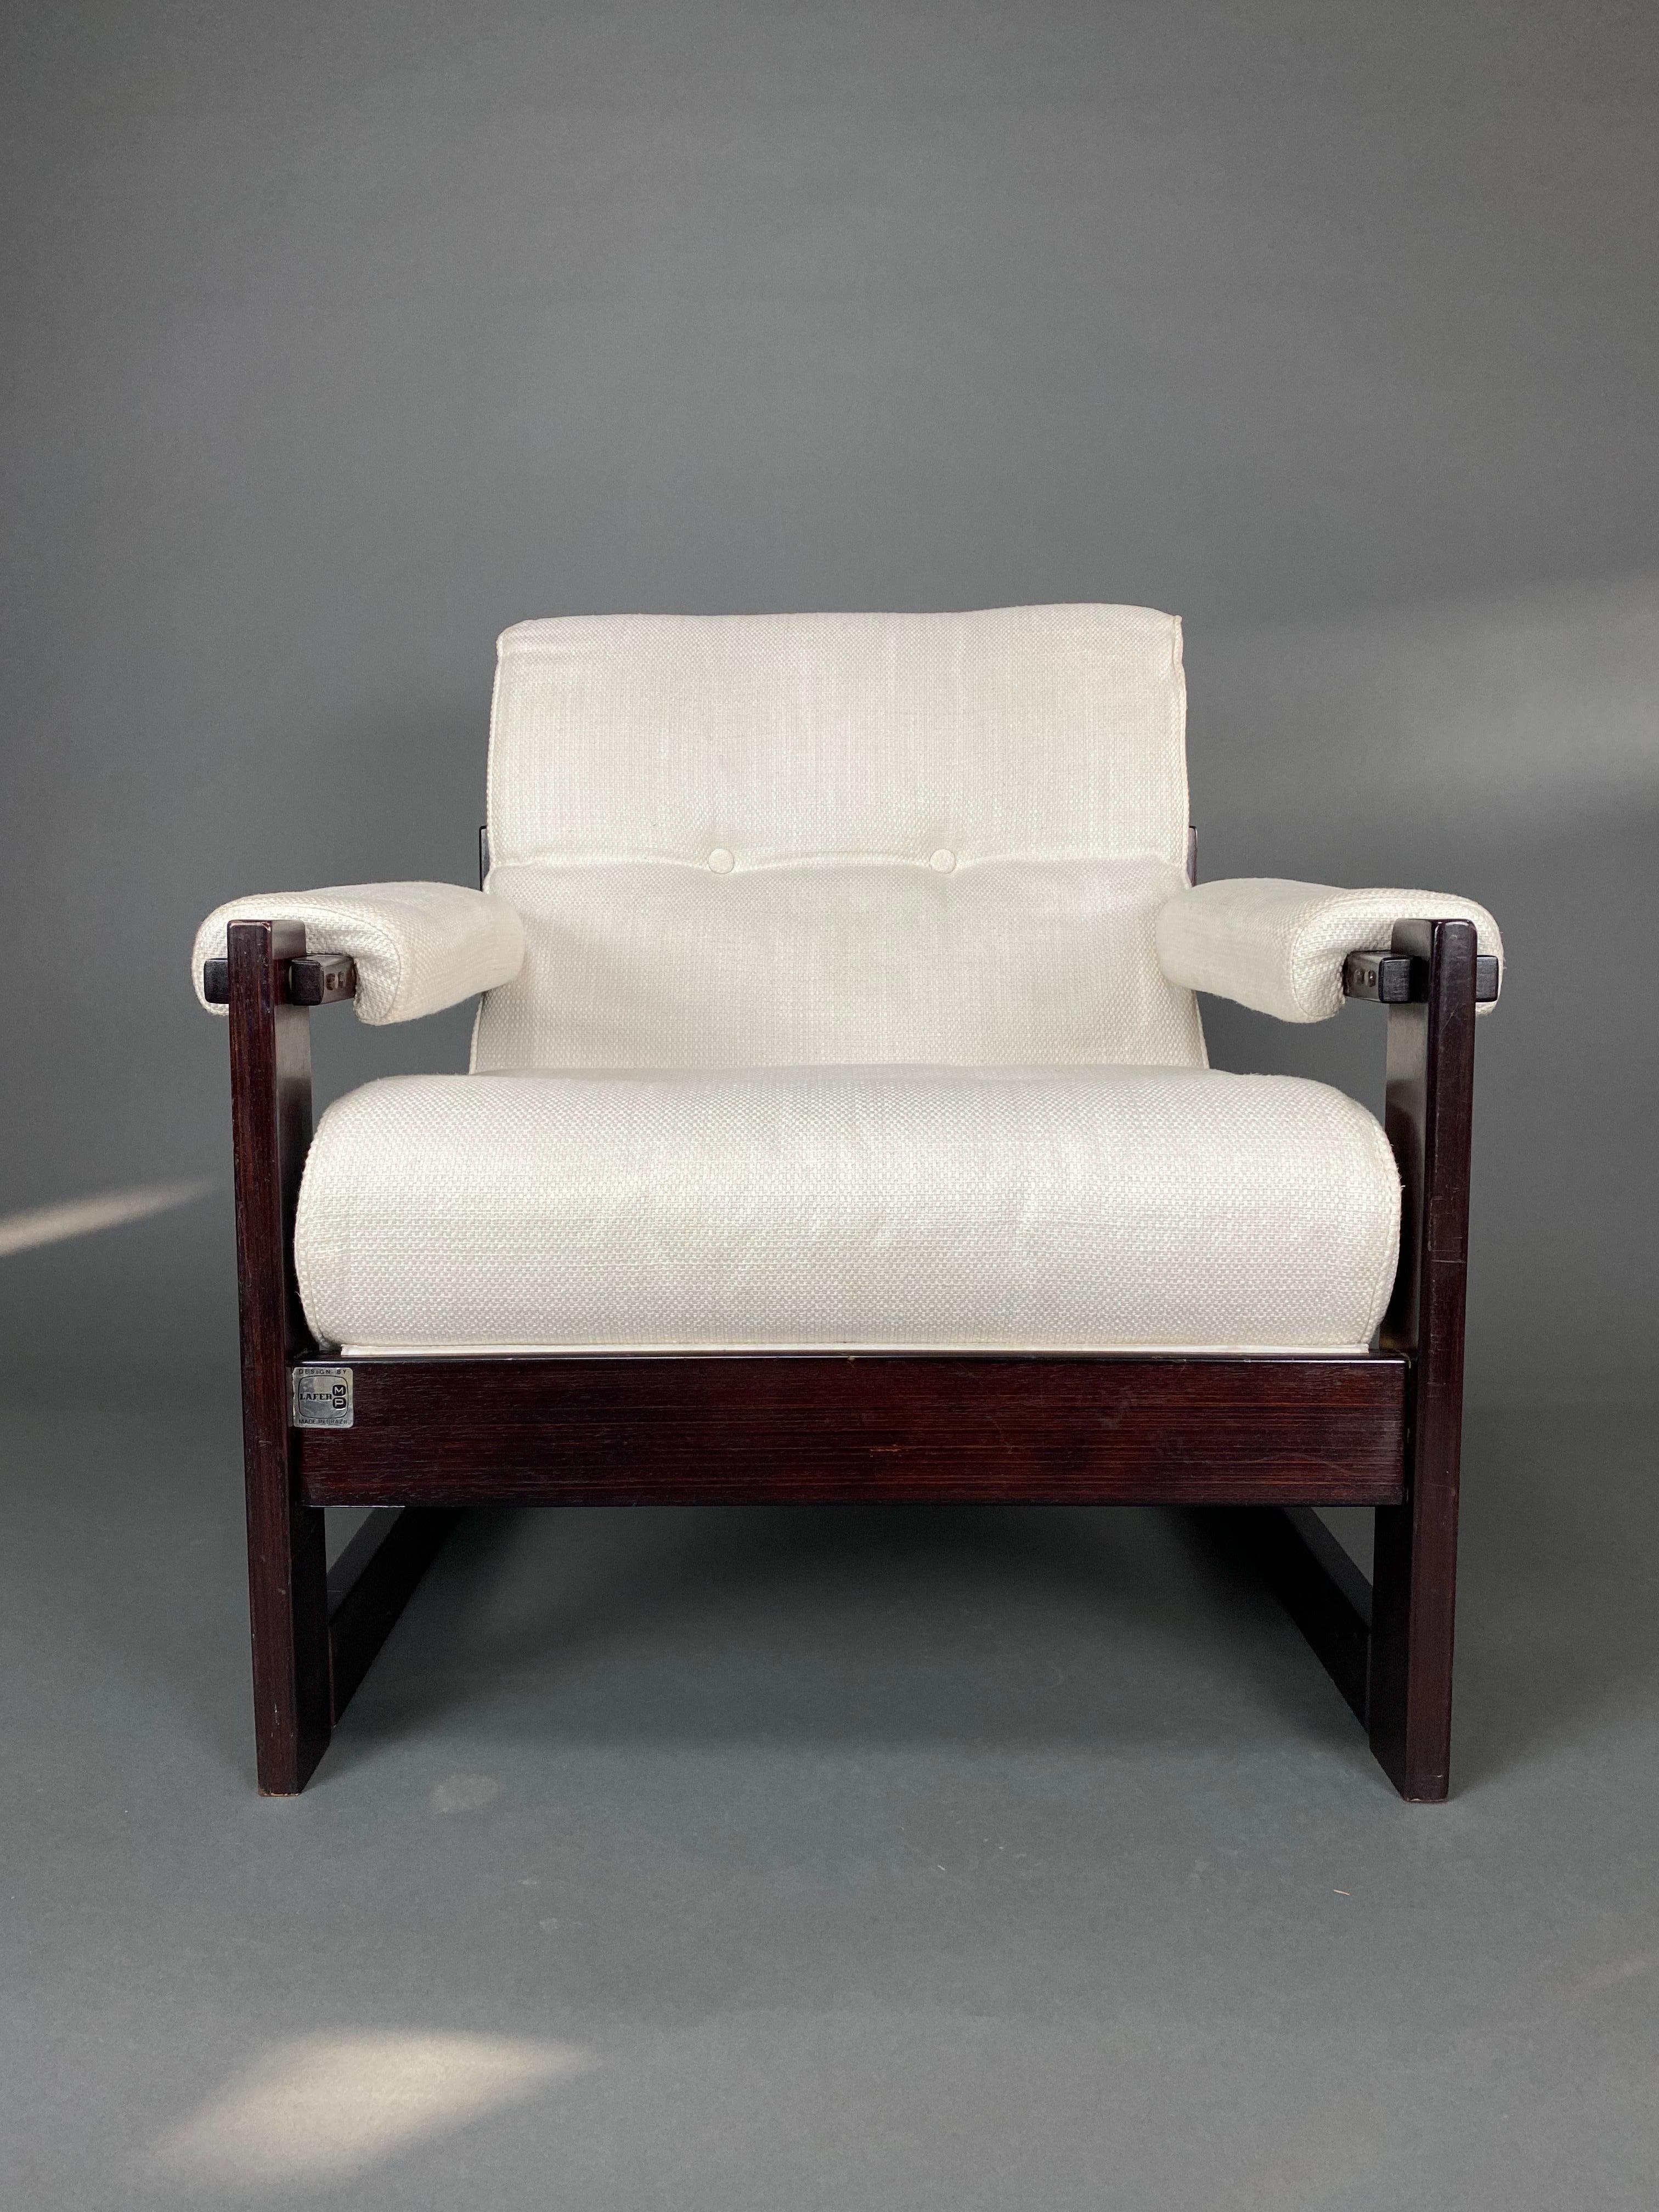 Mid-20th Century Percival Lafer Mid-Century Modern Lounge Chairs For Sale